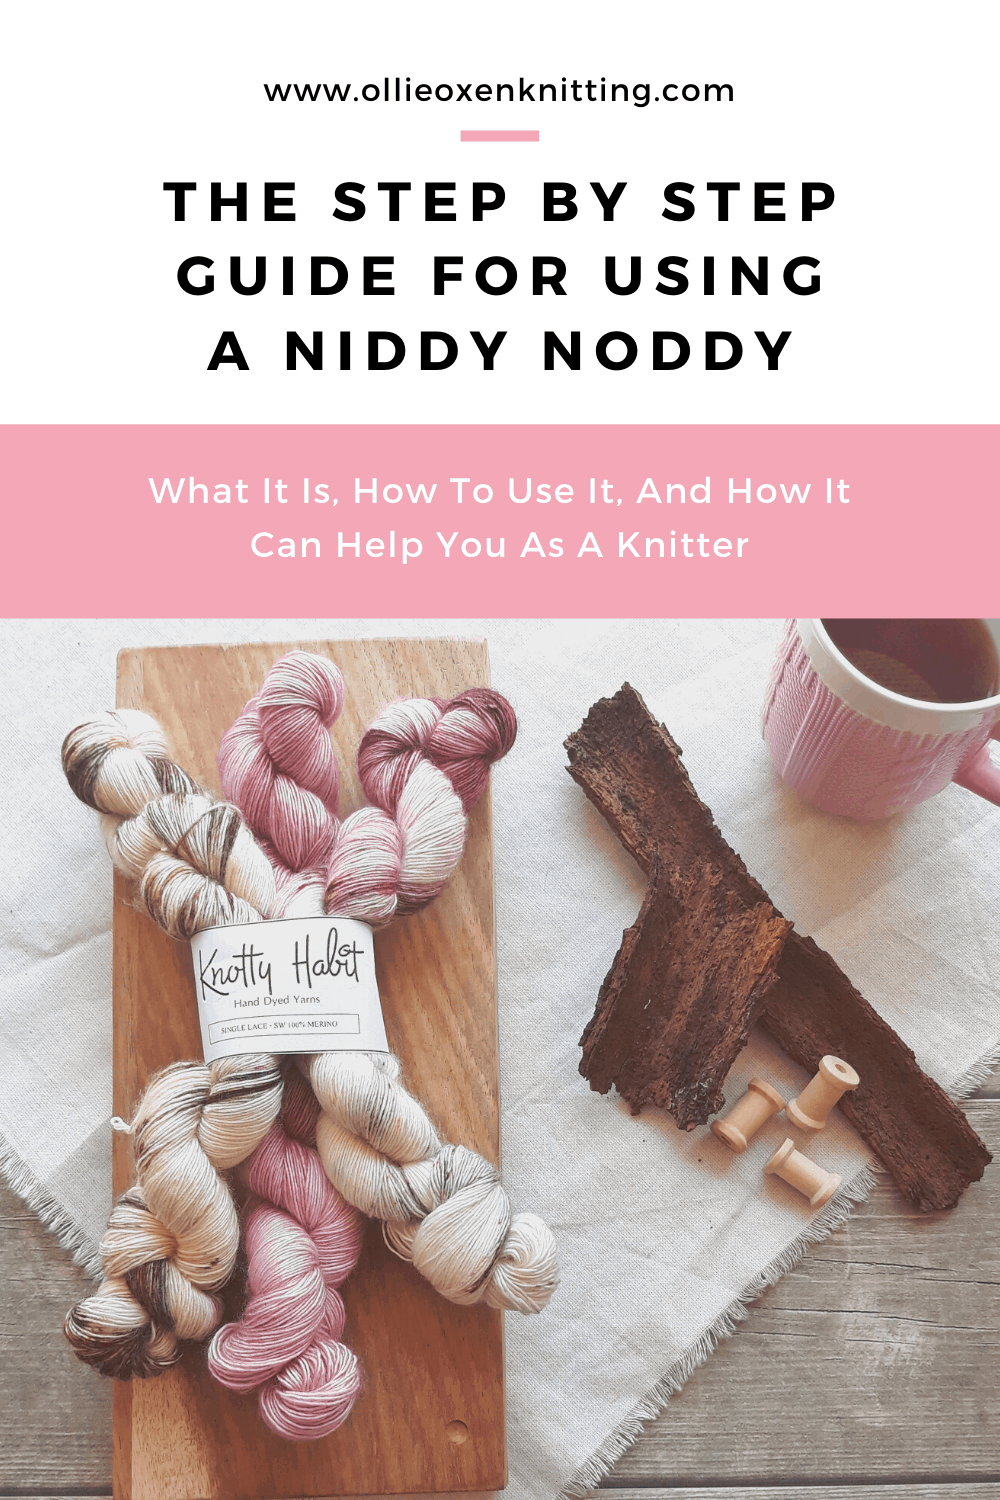 The Step By Step Guide For Using A Niddy Noddy: What It Is, How To Use It, And How It Can Help You As A Knitter | Ollie Oxen Knitting